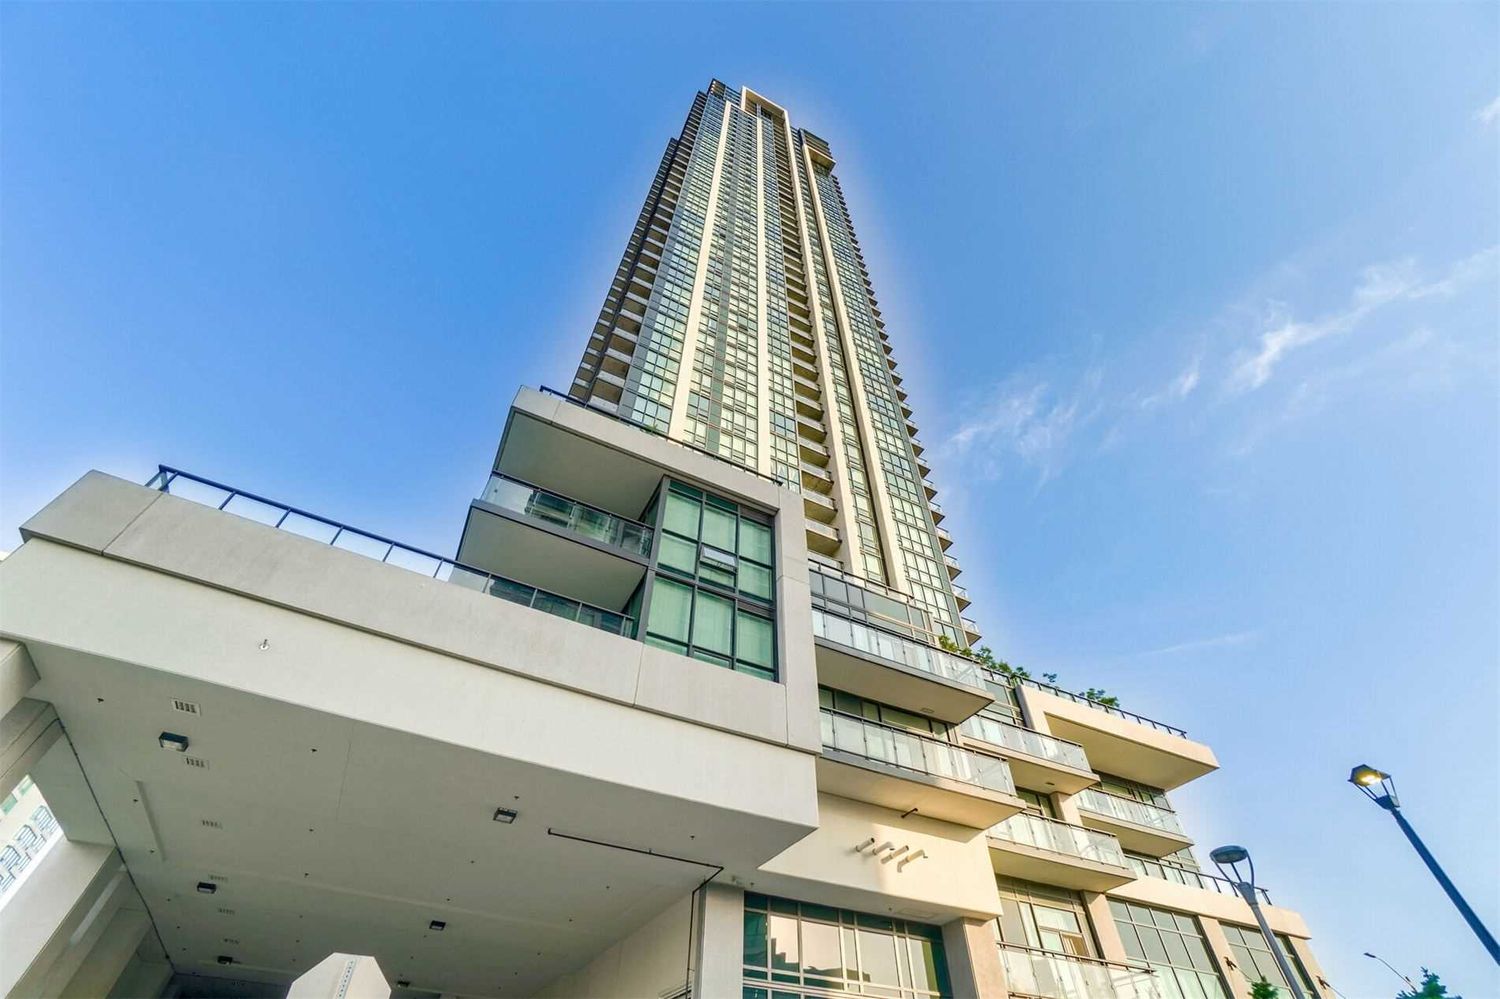 3975 Grand Park Drive. Pinnacle Grand Park II Condos is located in  Mississauga, Toronto - image #2 of 2